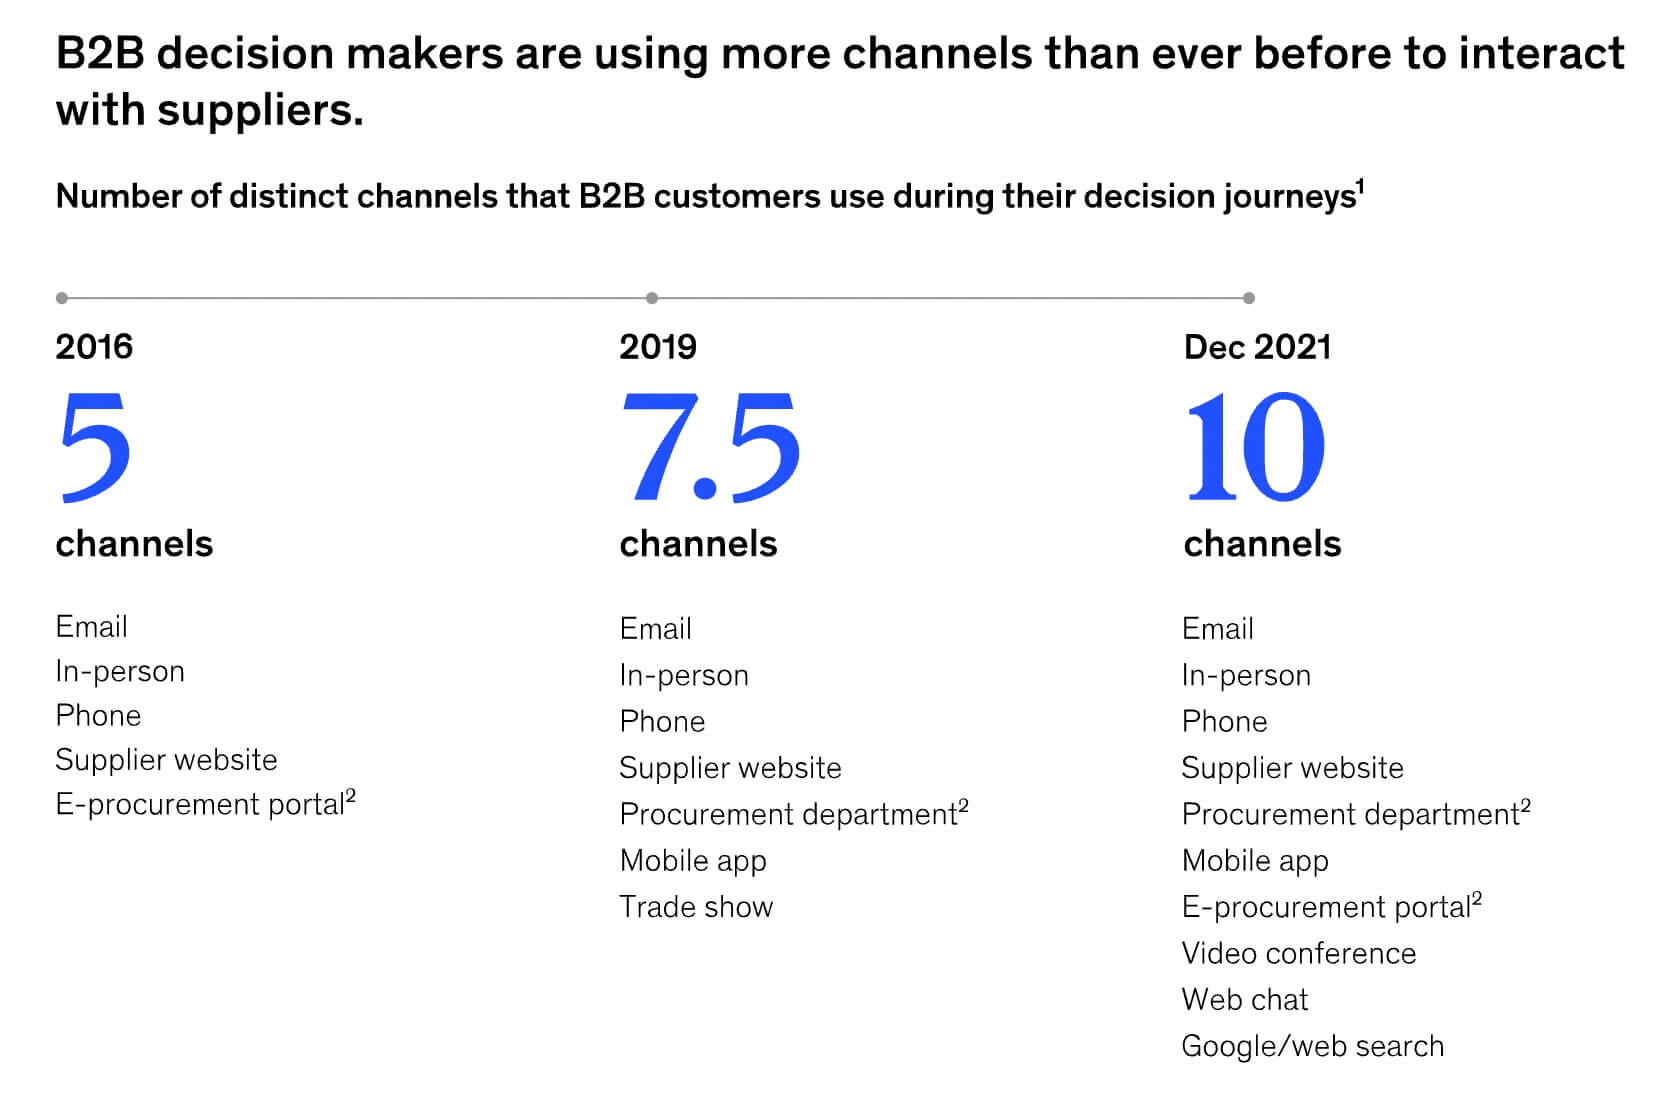 B2B decision makers used 5 channels to interact with clients in 2016, 7.5 channels in 2019, and 10 channels in 2021